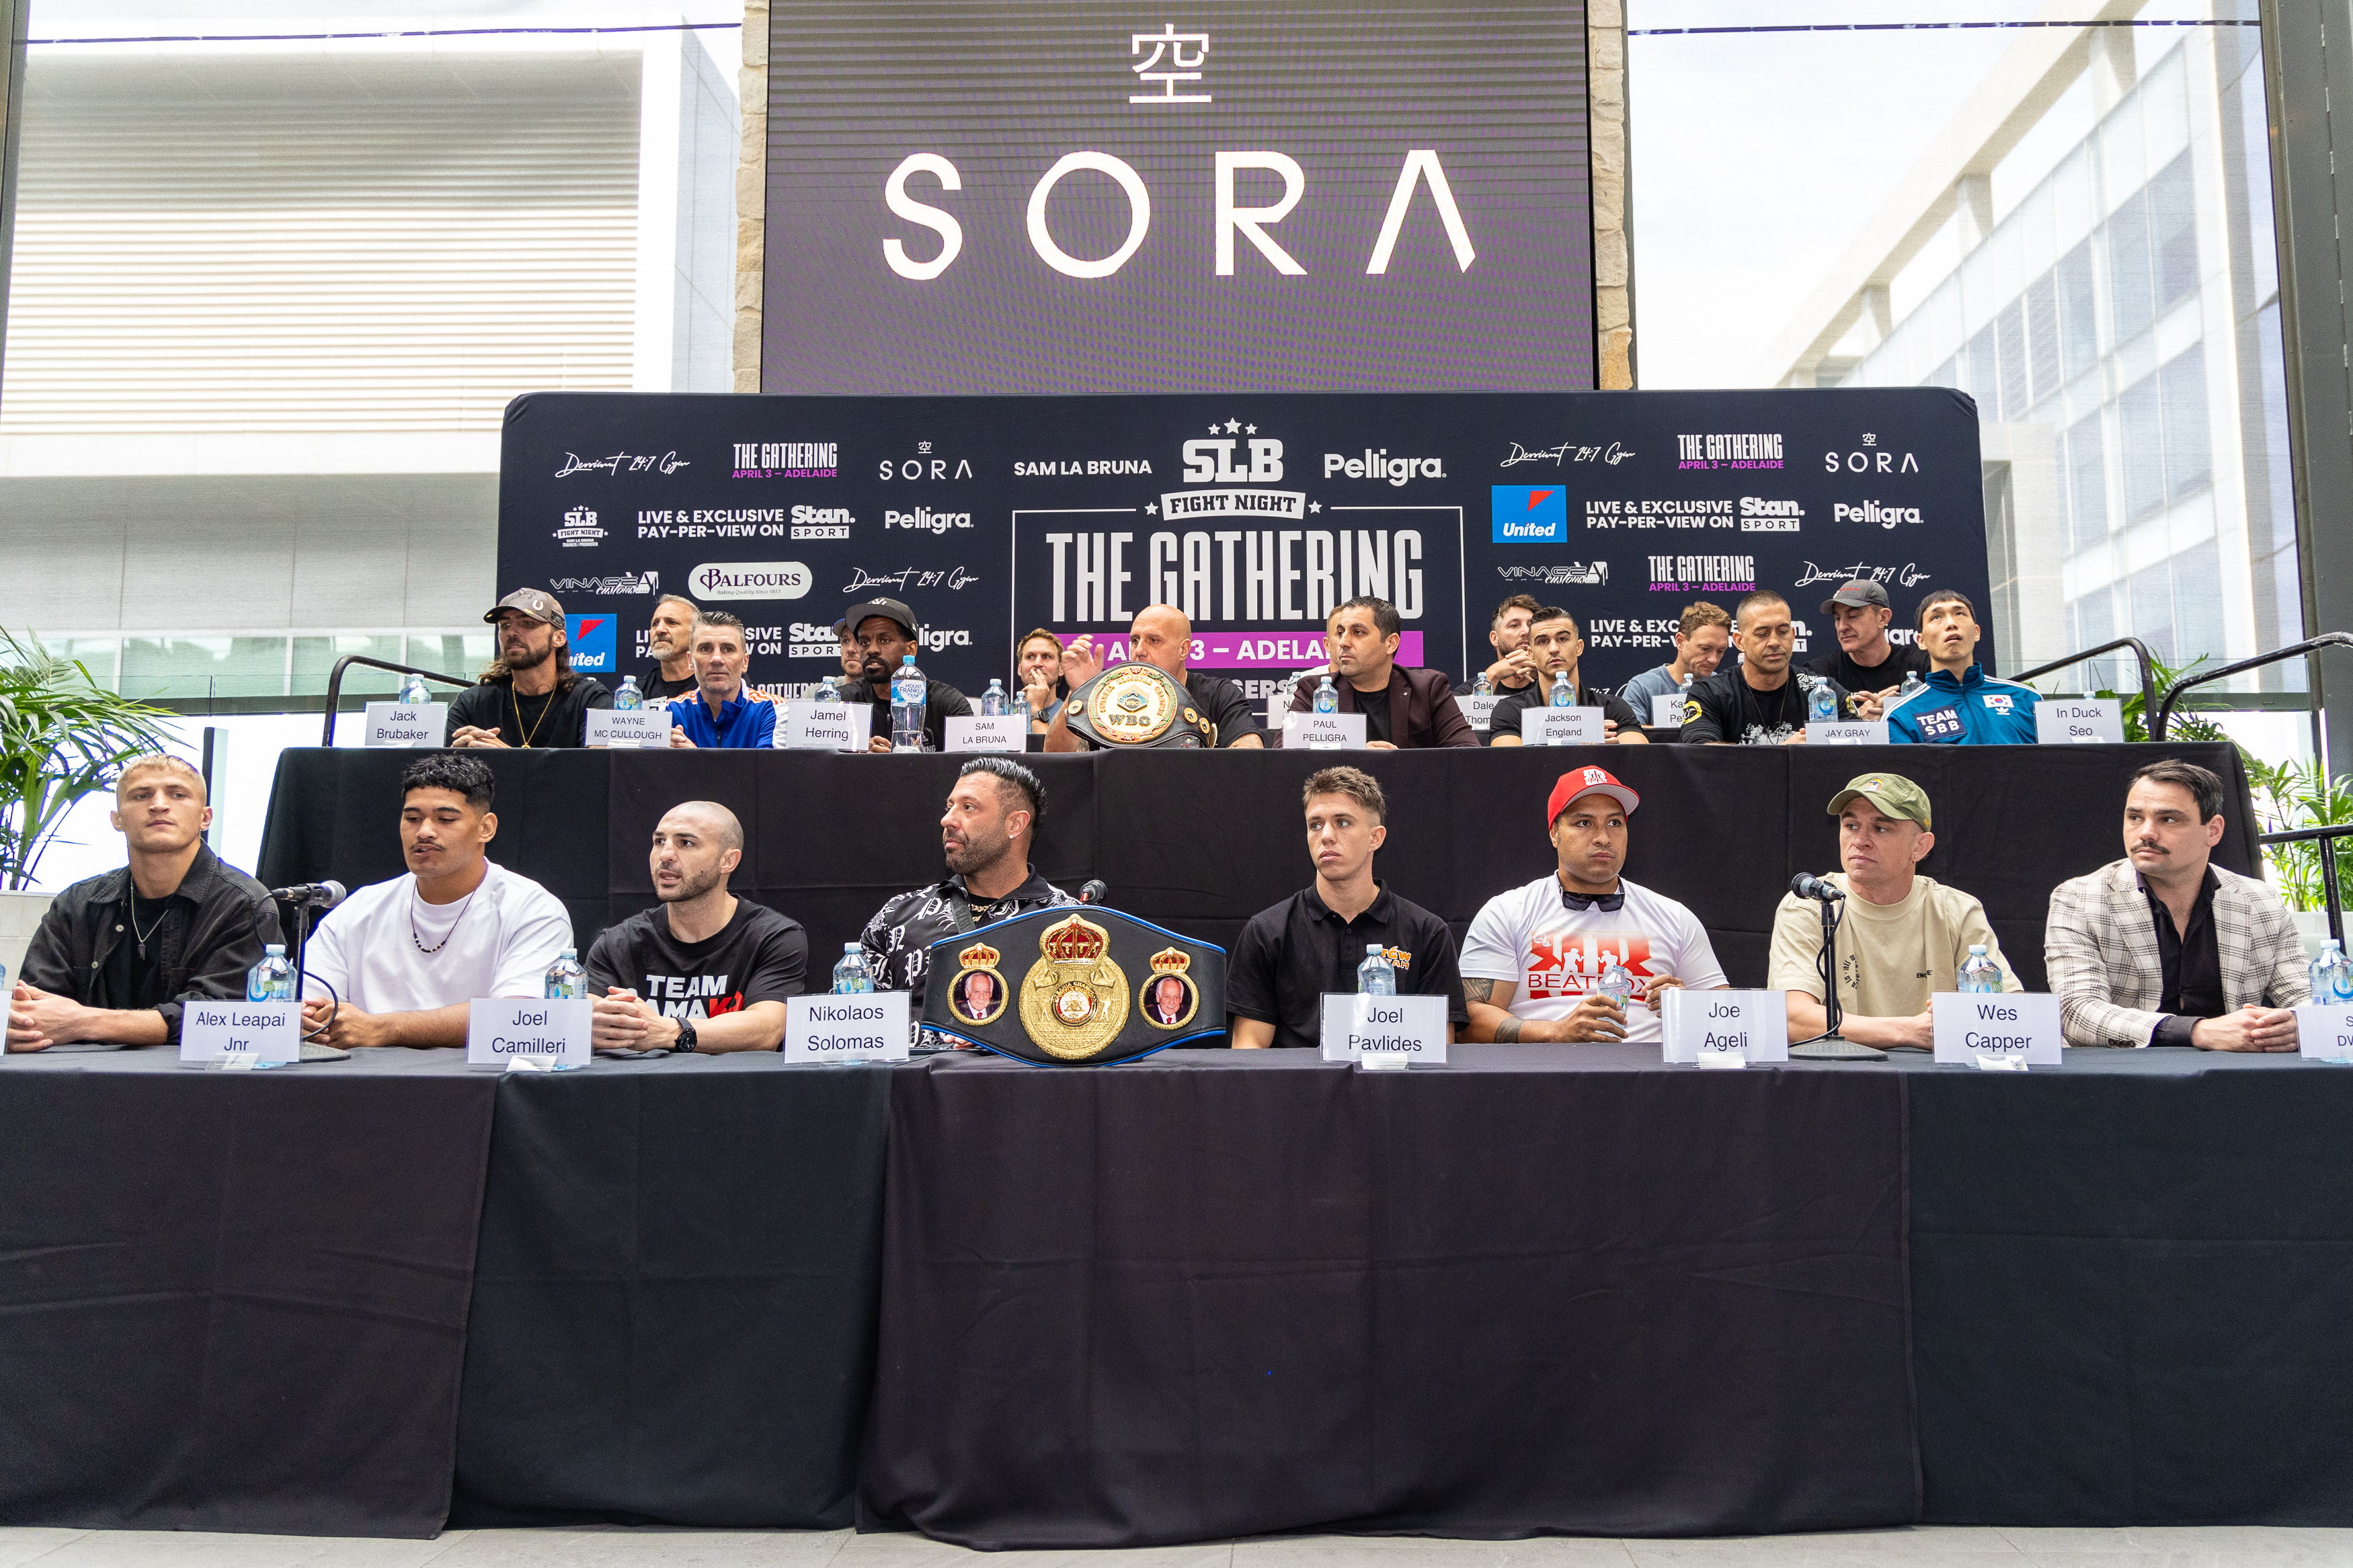 The fighters for The Gathering assembled today in Adelaide for the official press conference.
Image credit: Darren Burns & Marty Camilleri